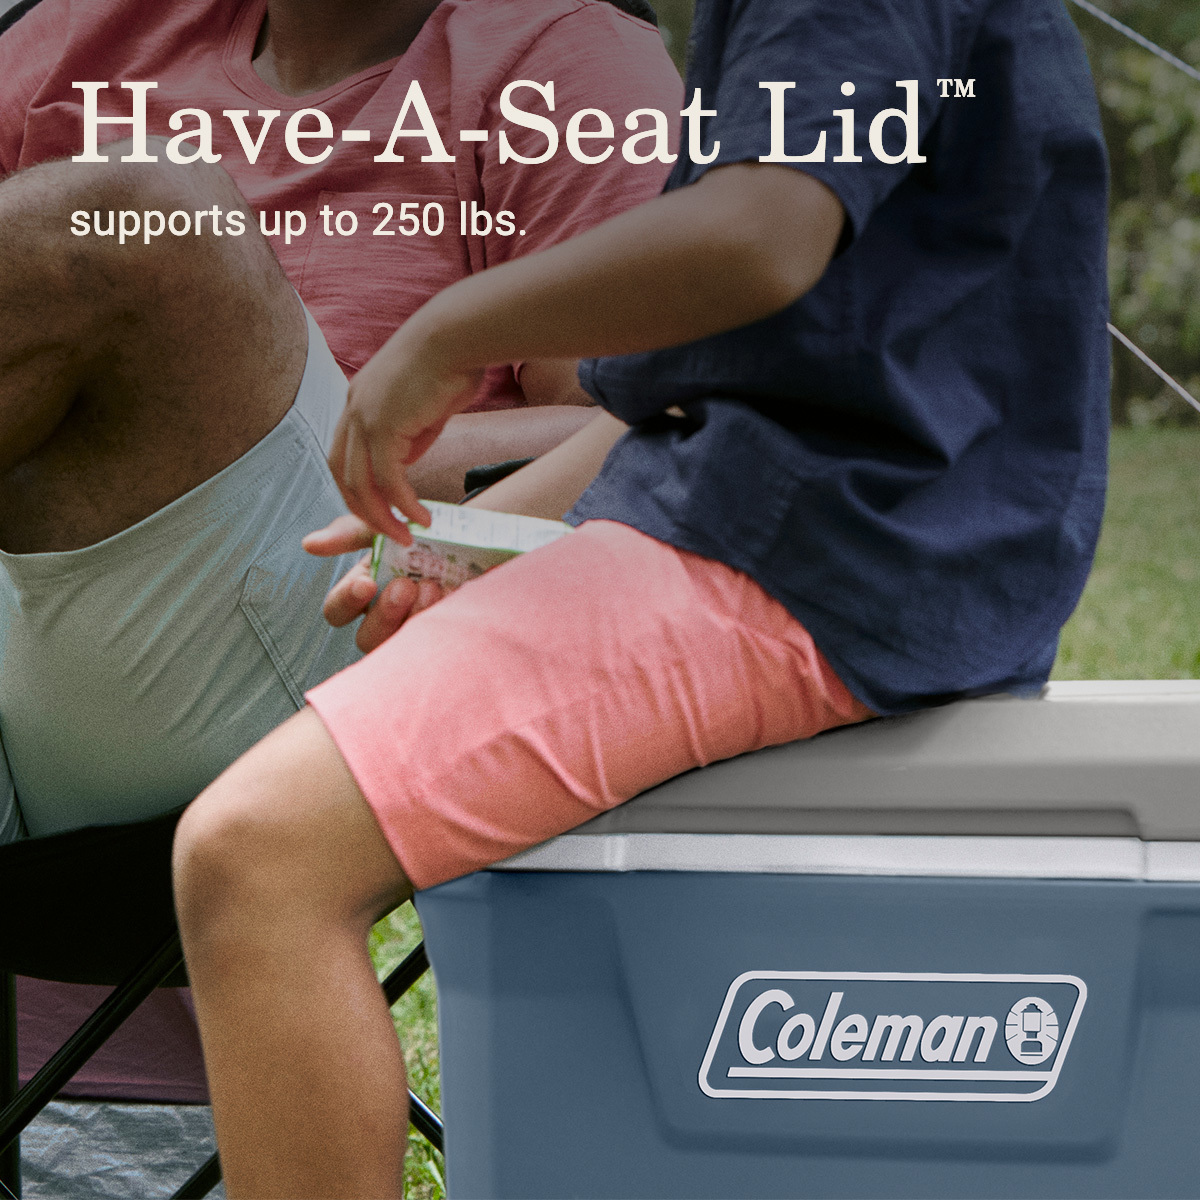 Coleman 316 Series 60QT Hard Chest Wheeled Cooler, Lakeside Blue - image 4 of 11